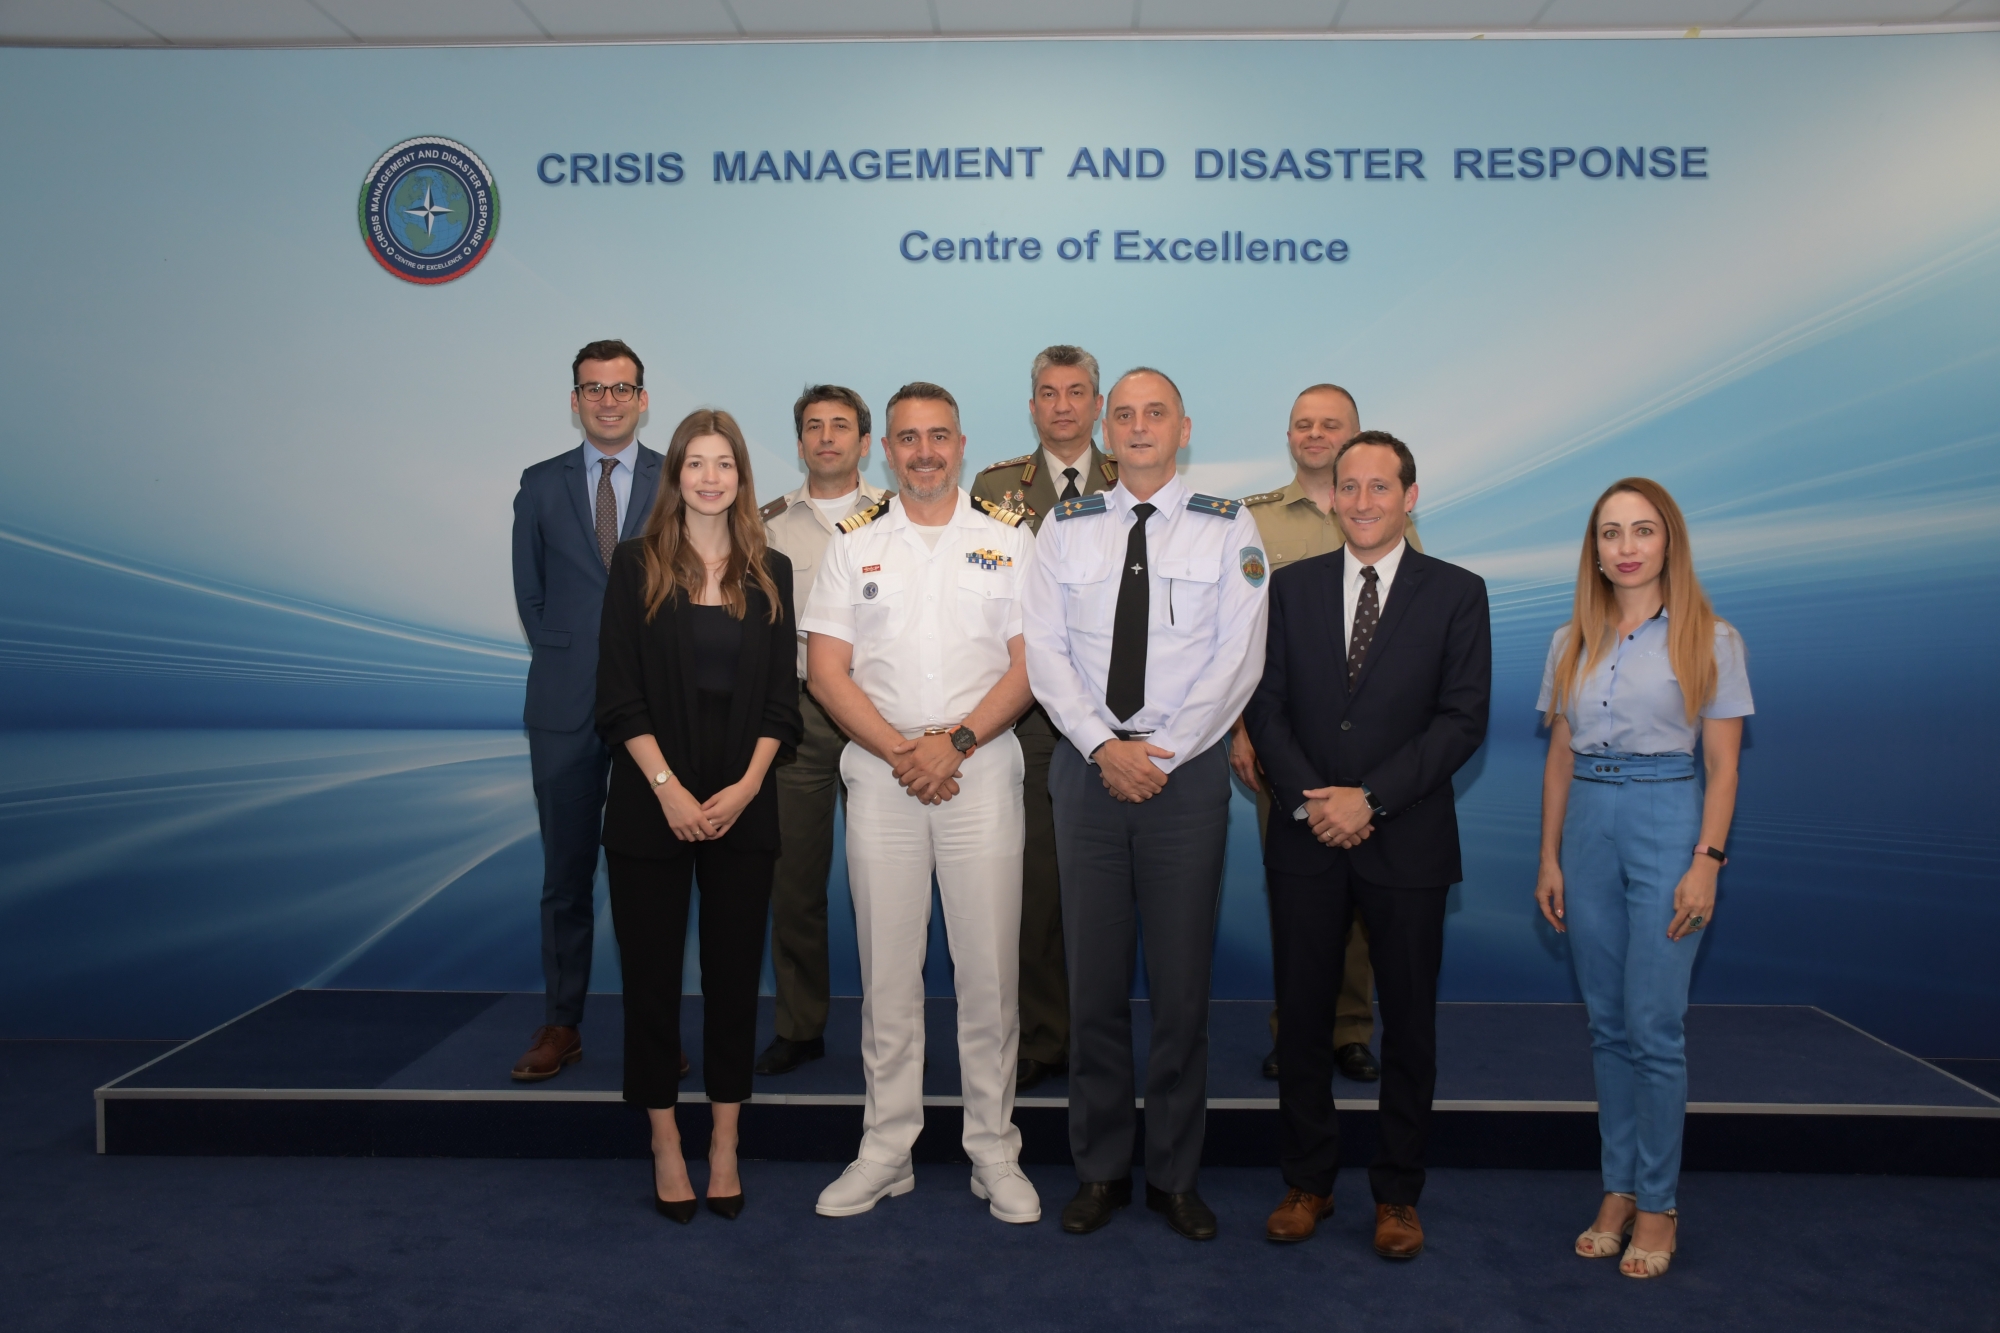 Representatives from UK and US Embassies paid a visit to CMDR COE